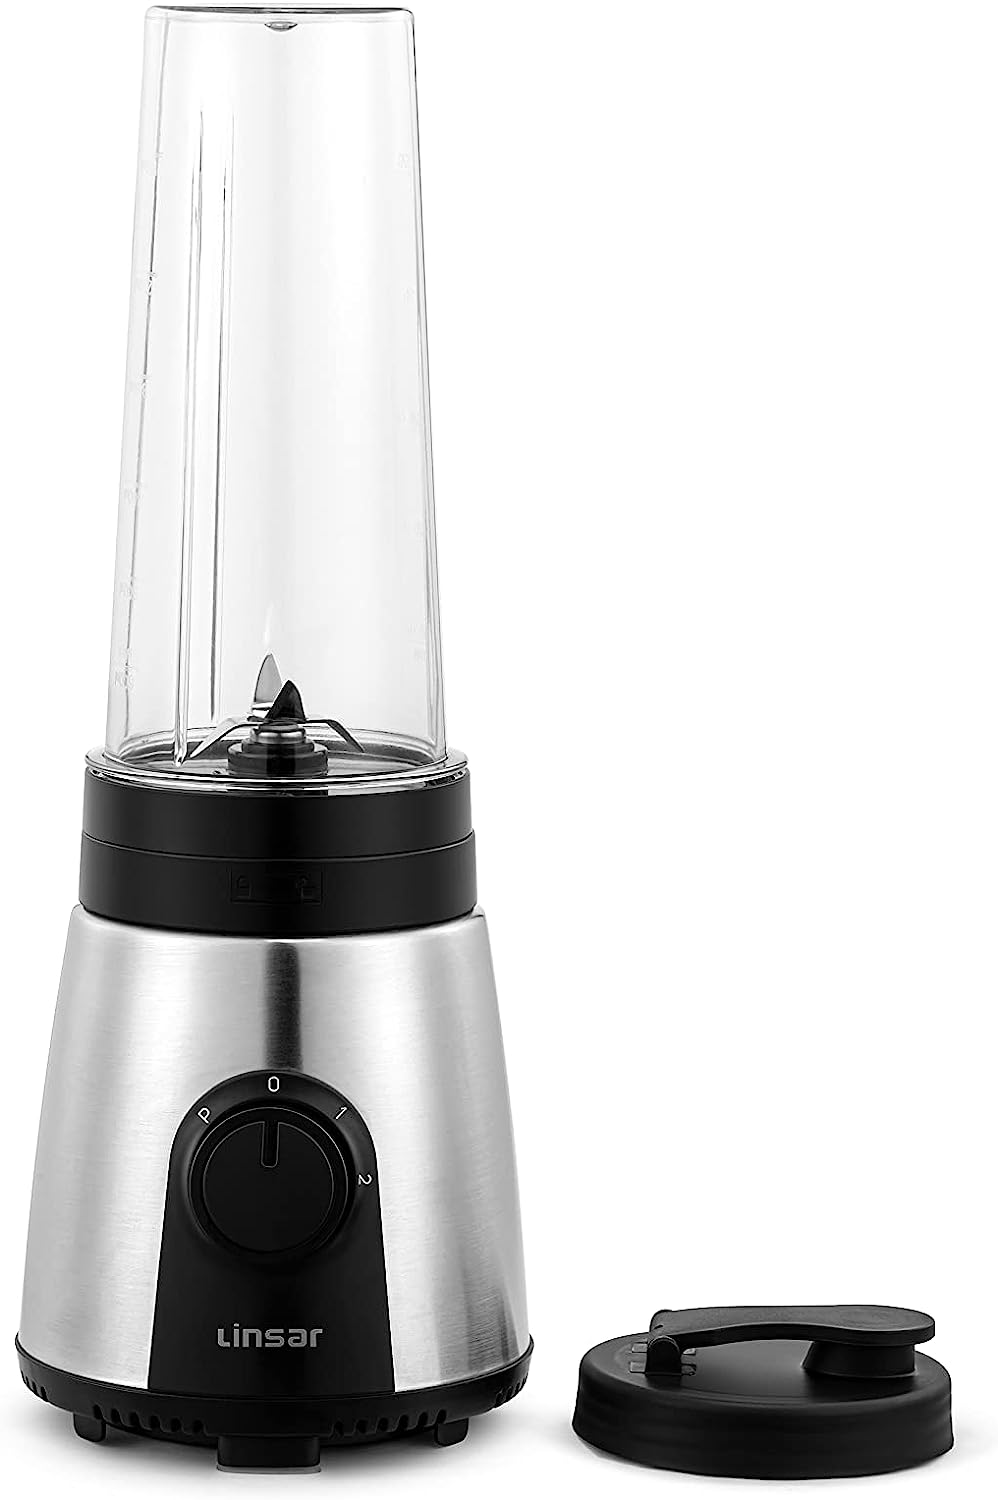 Linsar 2-in-1 smoothie maker in 2 mixing levels, normal and pulse, 4-blade stainless steel knife, 600 ml, BPA-free to-go cup, for smoothie, ice cubes, 24,000 rpm, 300 watts